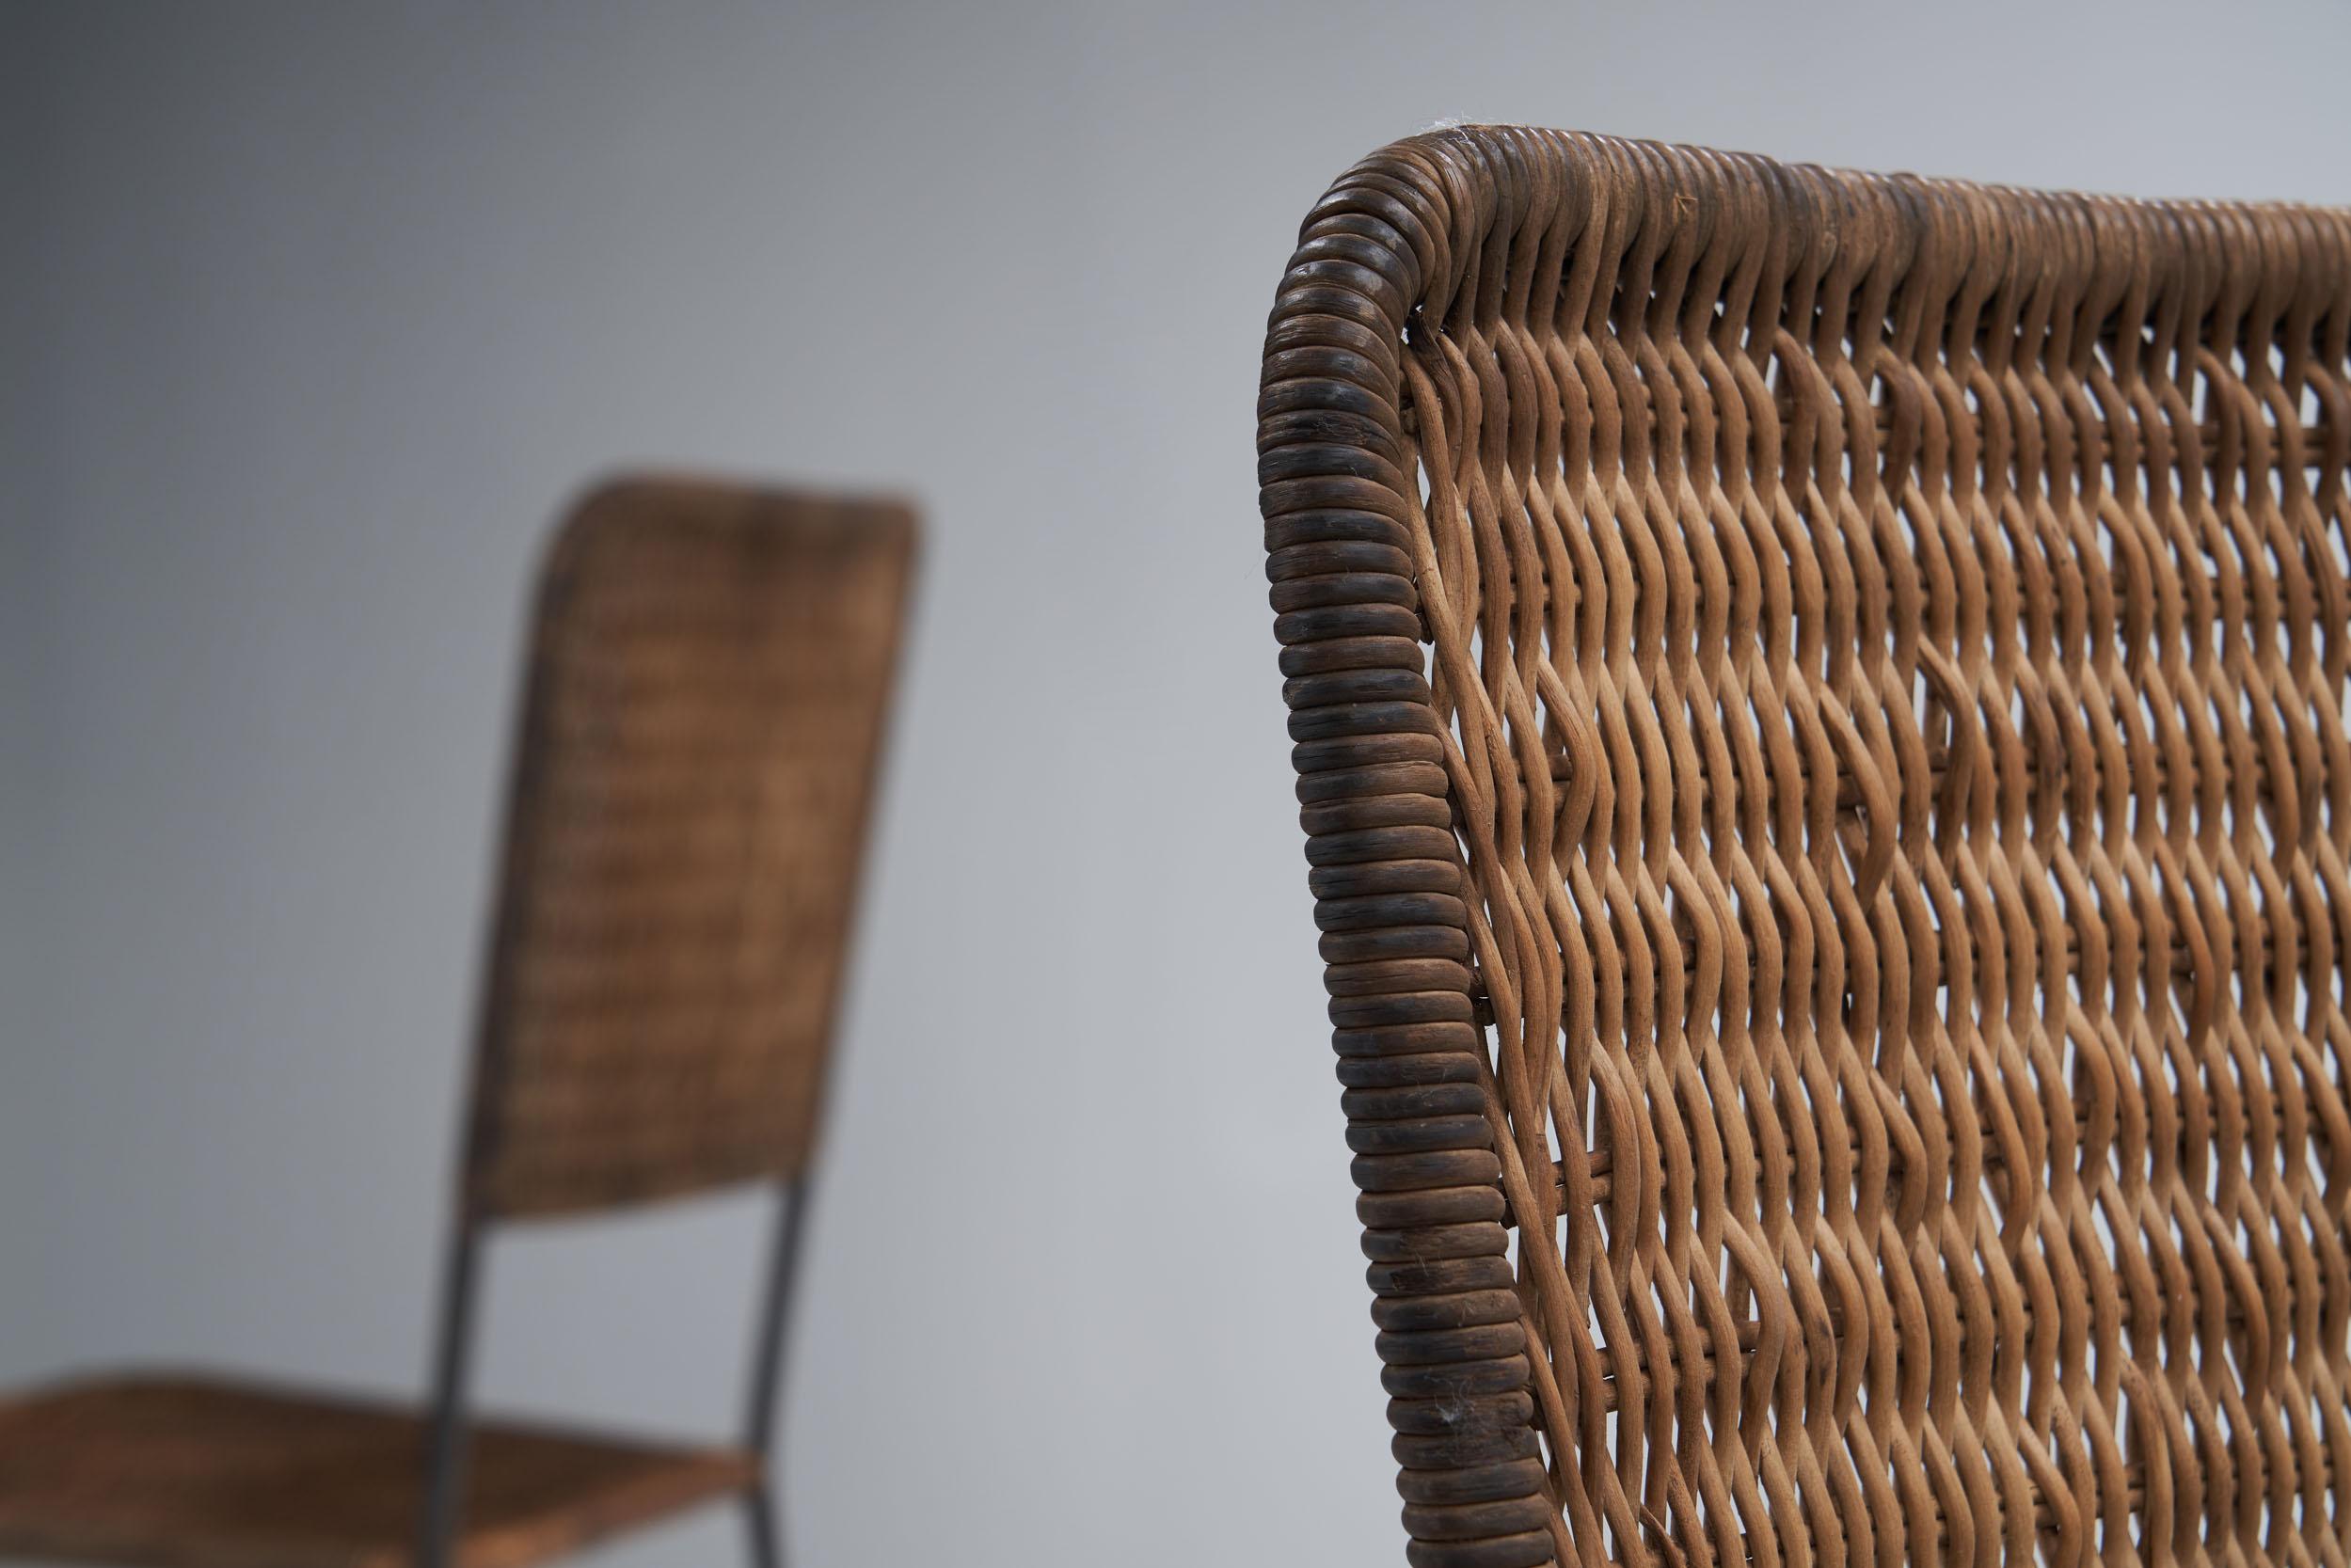 6 Iron and Rattan Chairs, Brazil, 1960s For Sale 2